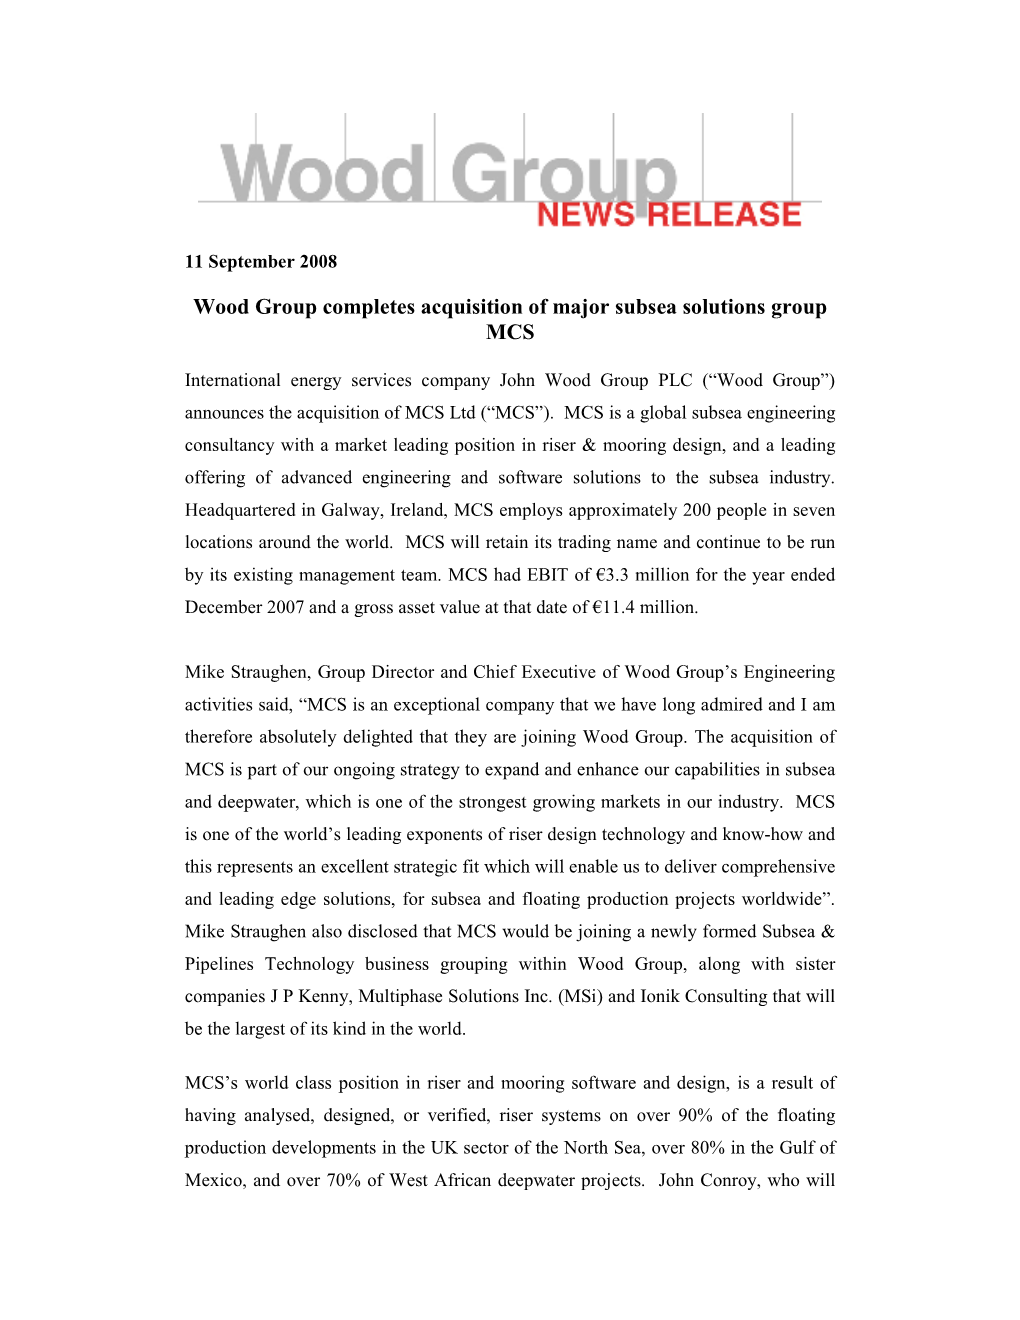 Wood Group Completes Acquisition of Major Subsea Solutions Group MCS